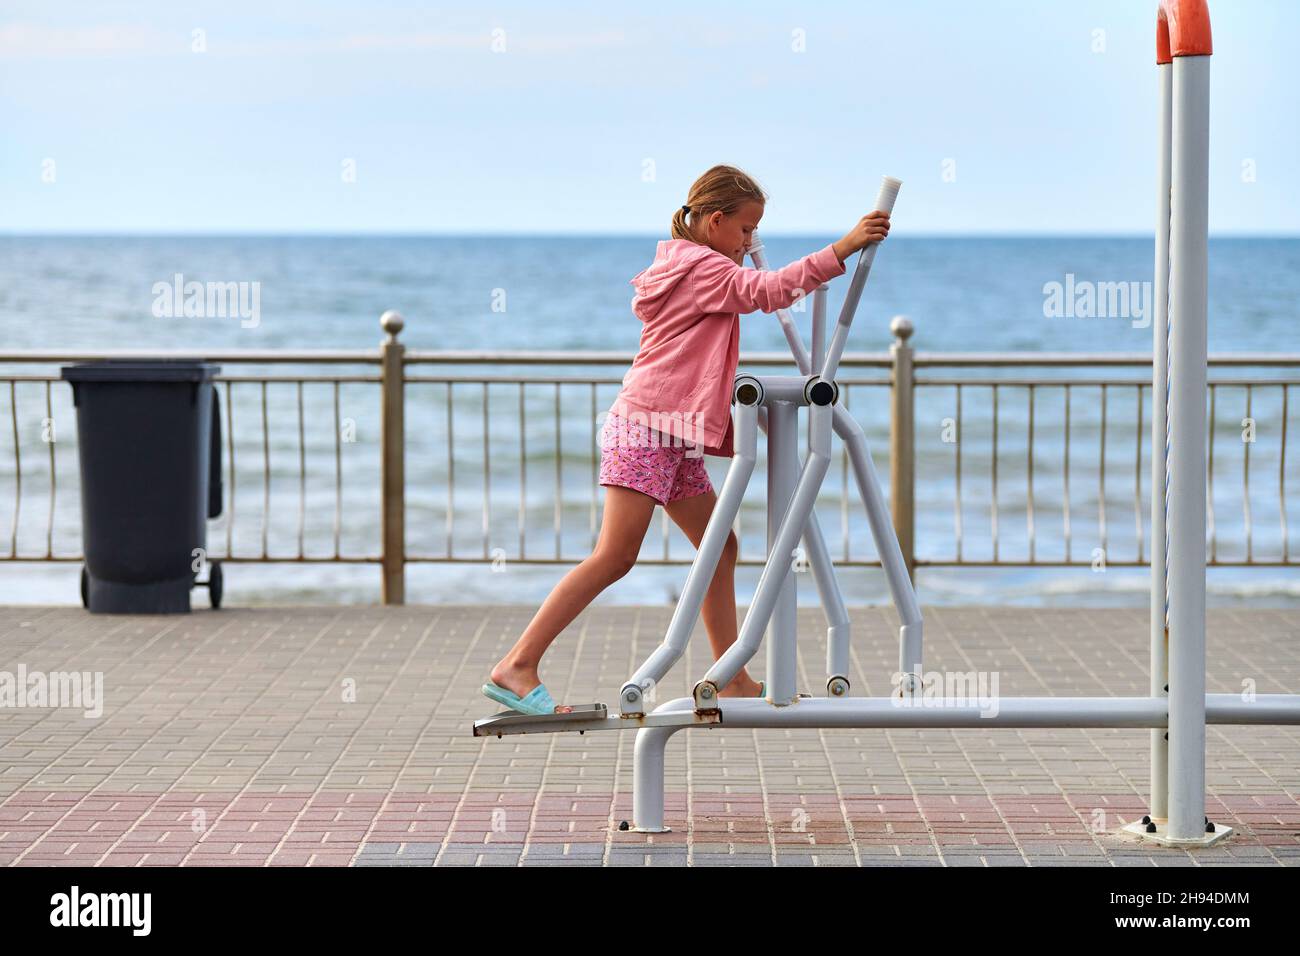 Zelenogradsk, Russia - 07.30.2021 - Young girl in pink clothes using air walker exercise machine, sea background. Girl engaged in fitness, footwork. O Stock Photo